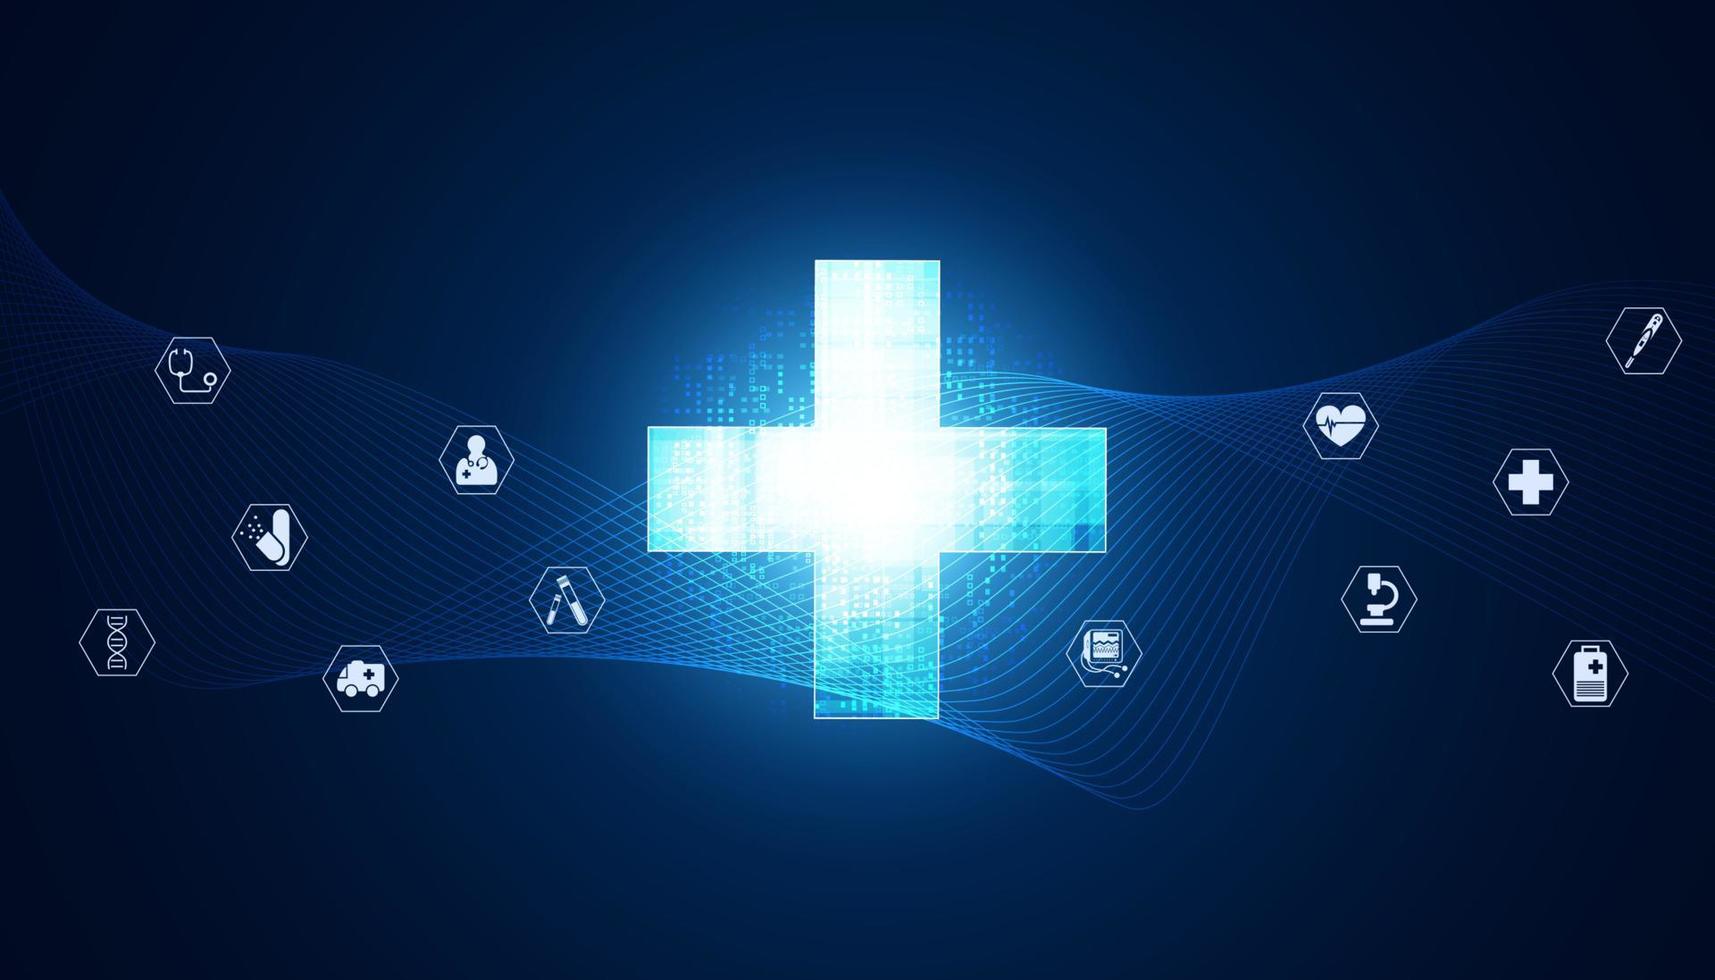 abstract health plus symbol with icons background concept health icons on blue background modern futuristic medical treatment disease vector